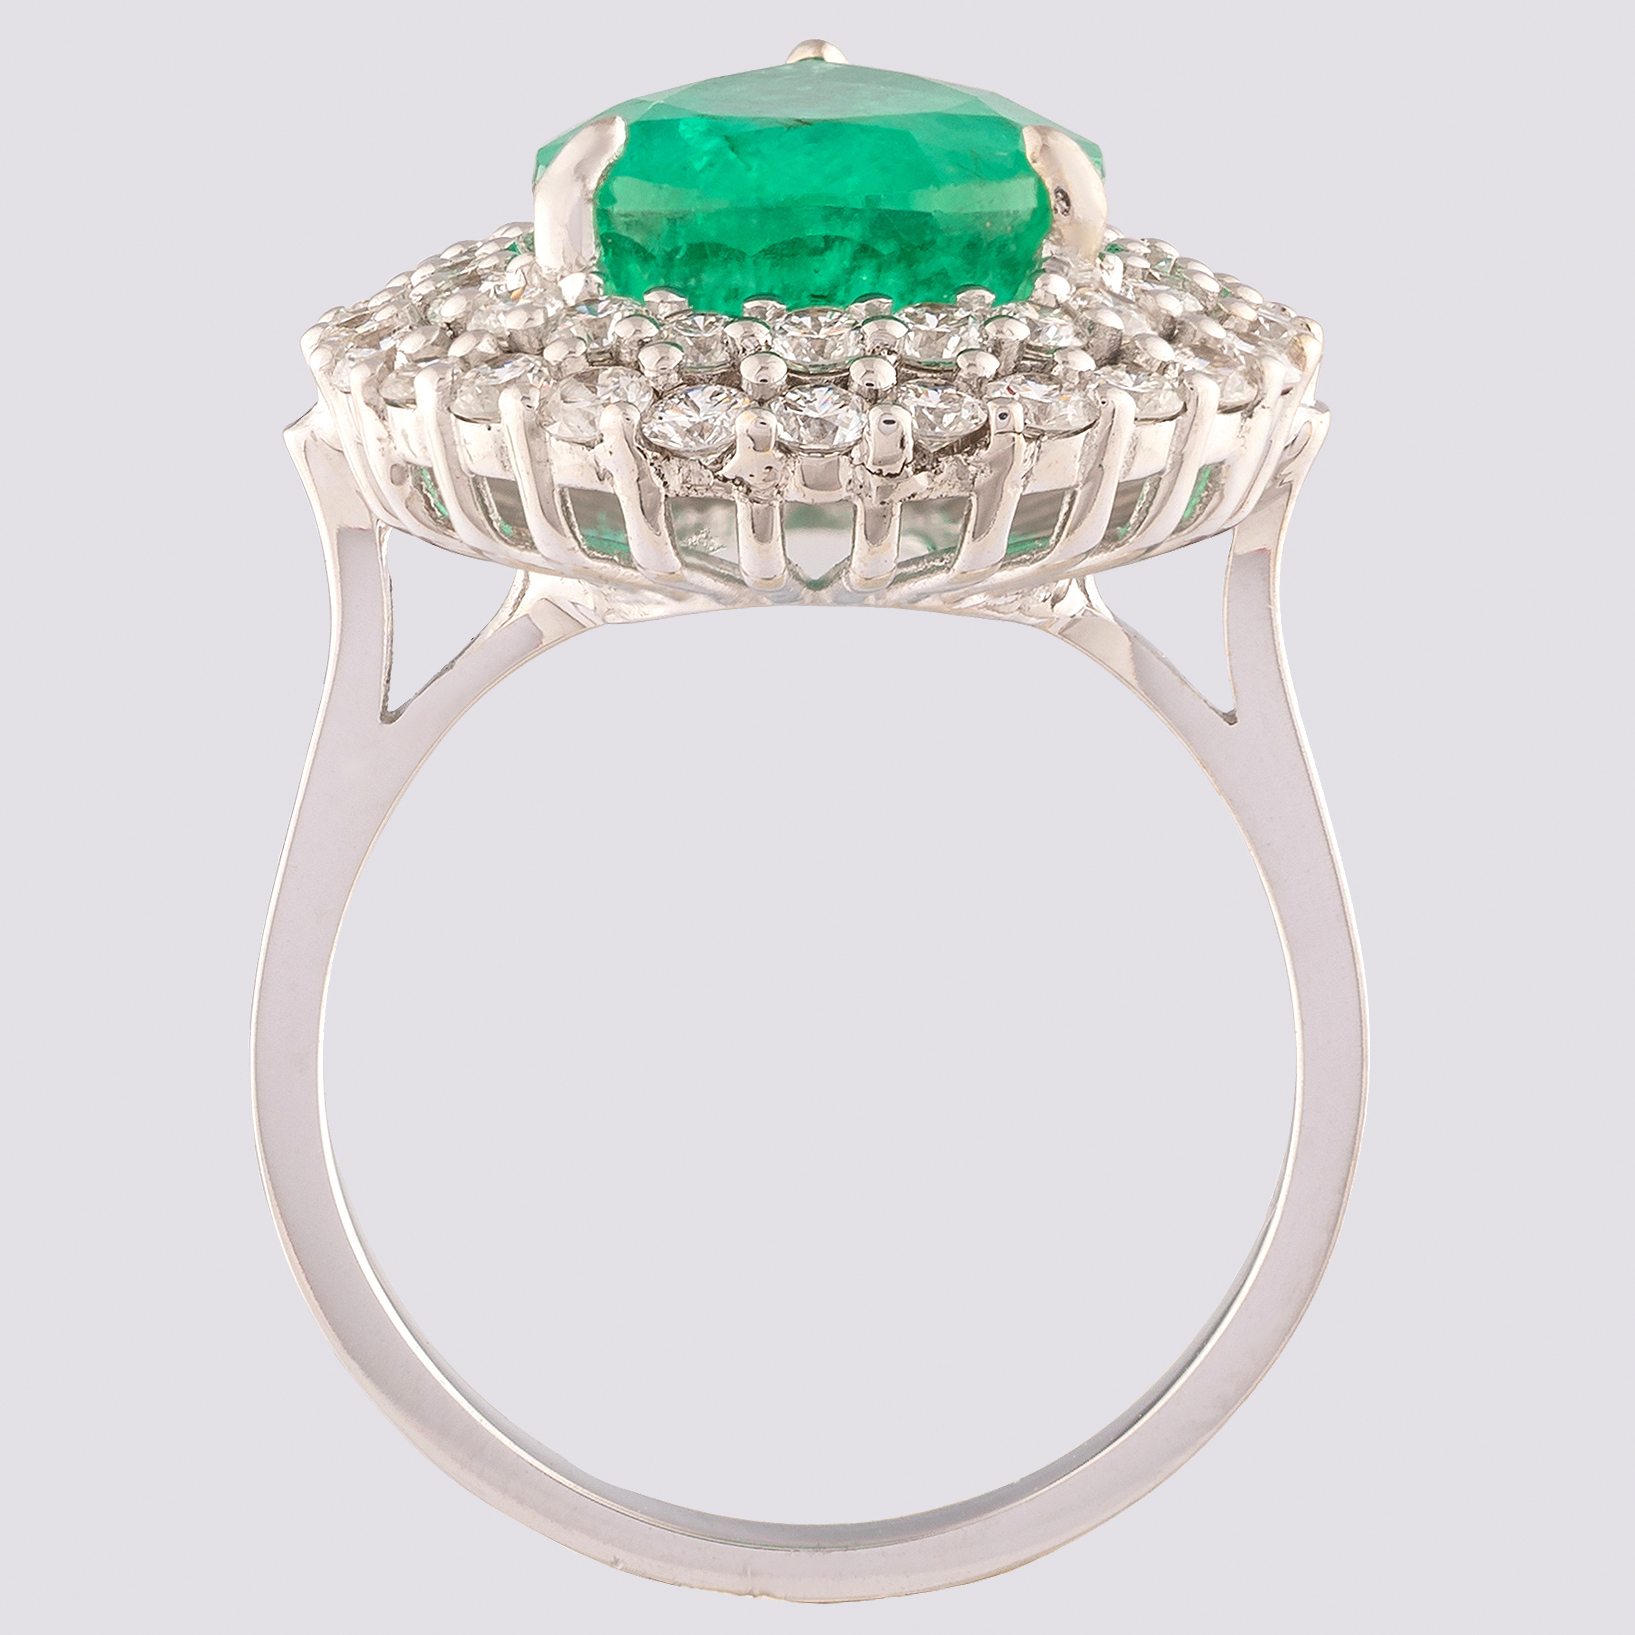 14K White Gold Cluster Ring 4,70 Ct. Natural Emerald - 1,40 Ct. Diamond - Image 4 of 4